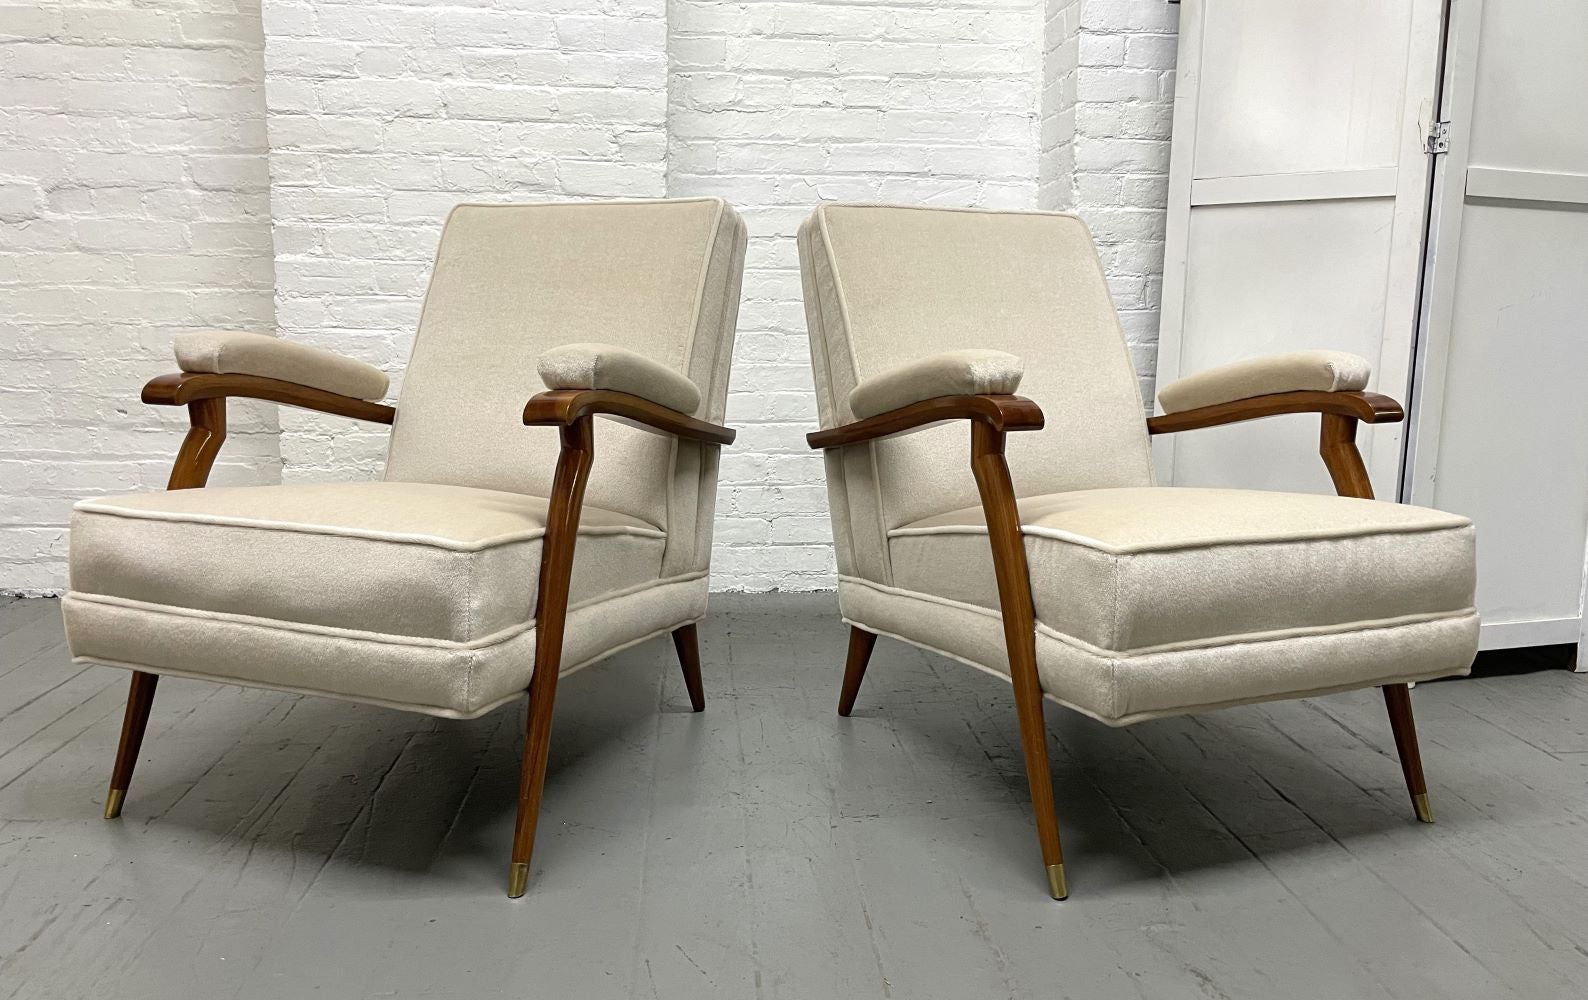 Pair of French Art Deco lounge chairs in the style of Maison Leleu. The chairs have birch frames, padded arms, and bronze sabots. Upholstered in mohair fabric.